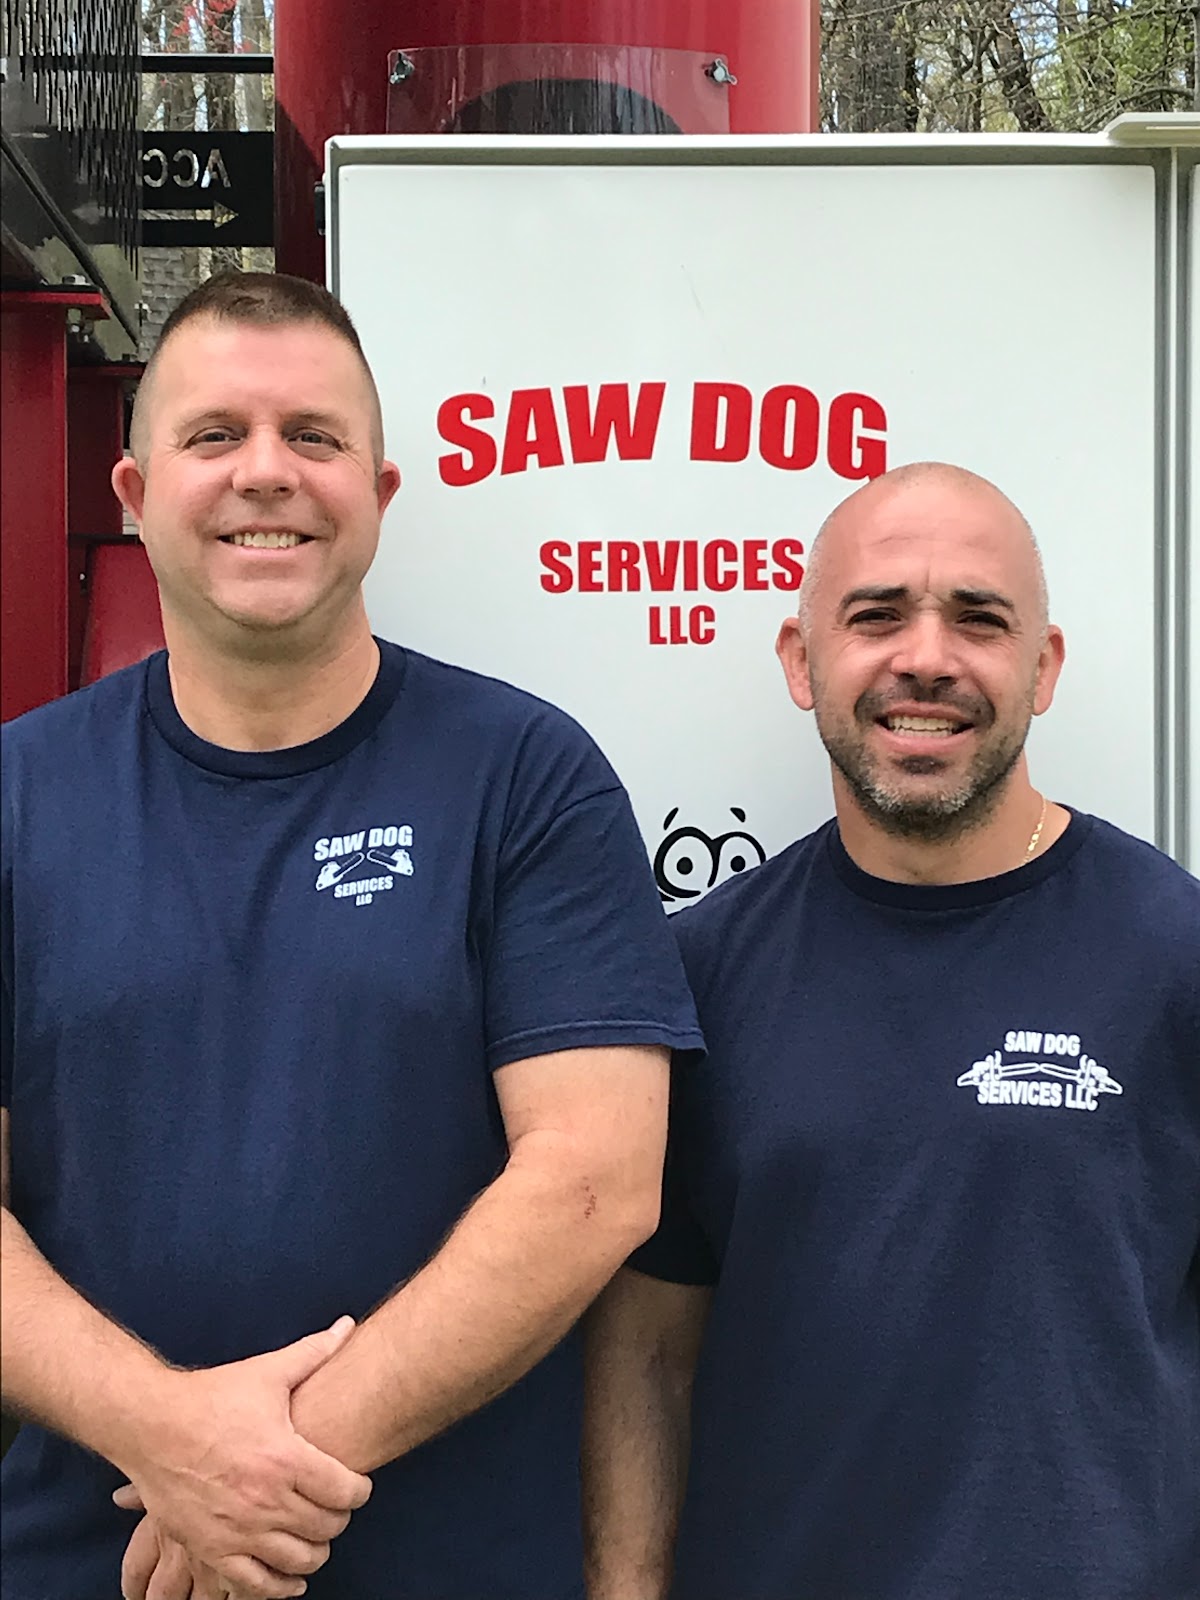 Highly recommend Saw Dog Services. They did a fantastic job removing trees on my property from start to finish